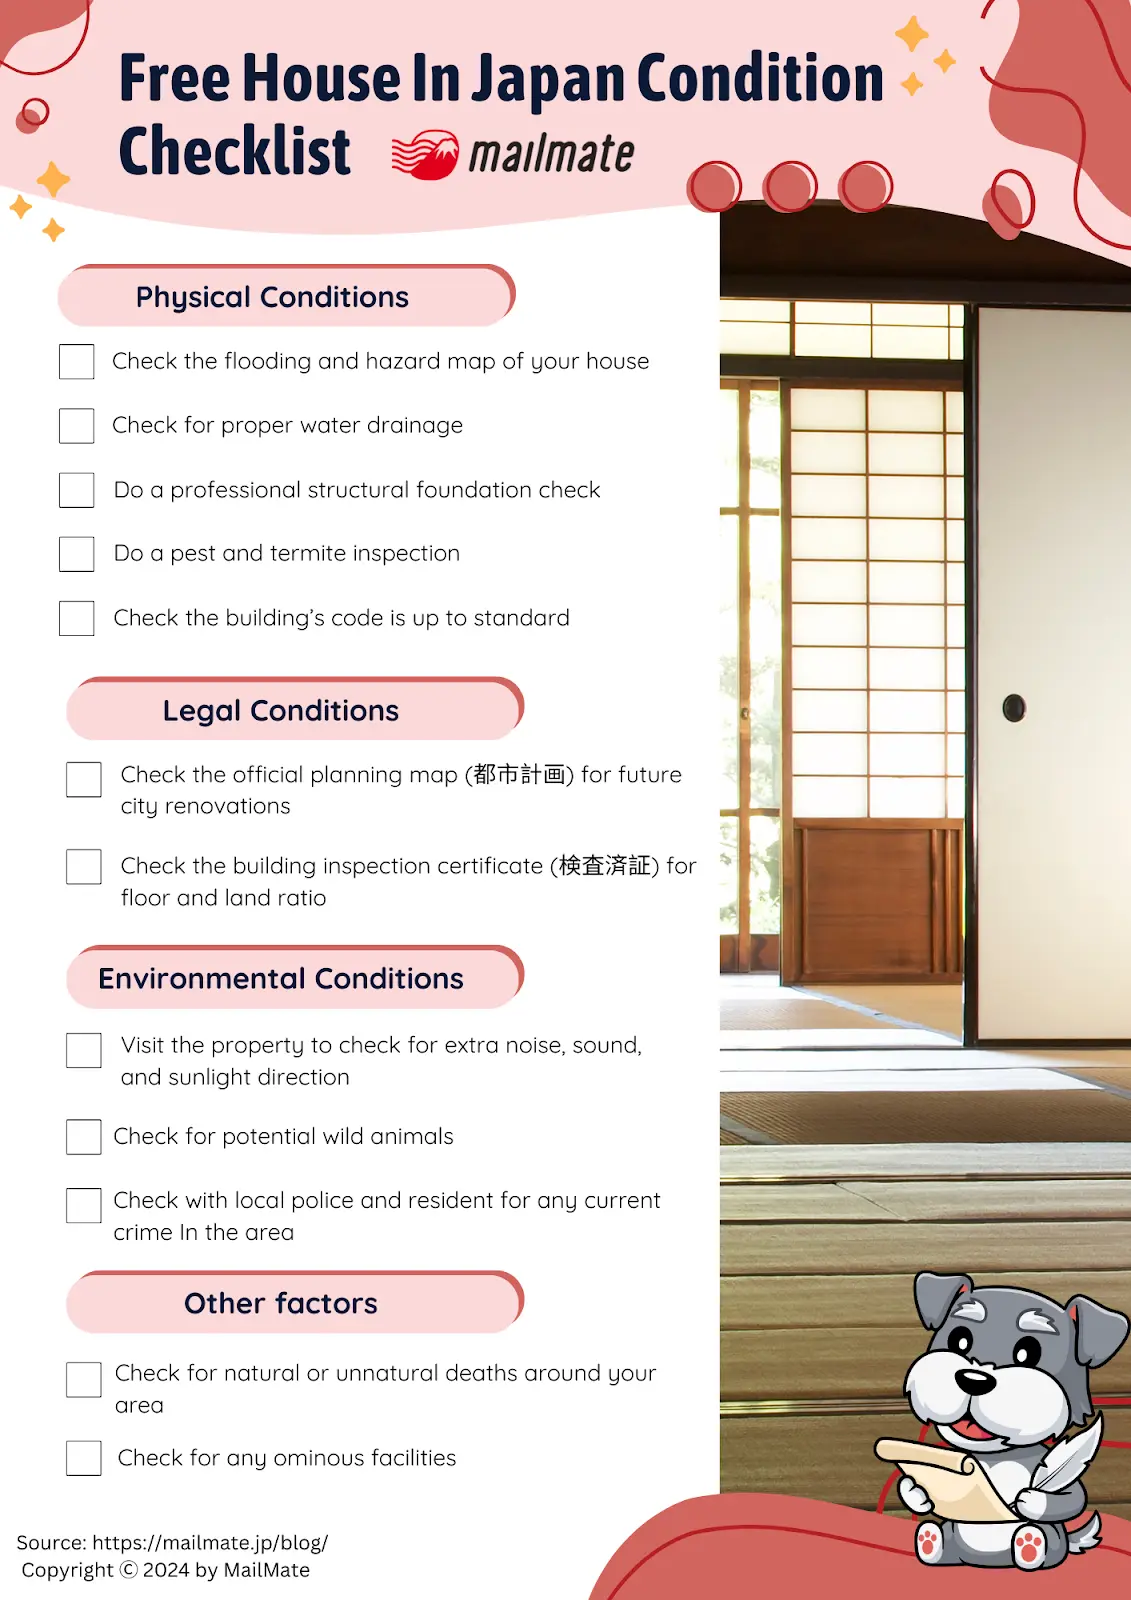 Condition checklist for free houses in Japan